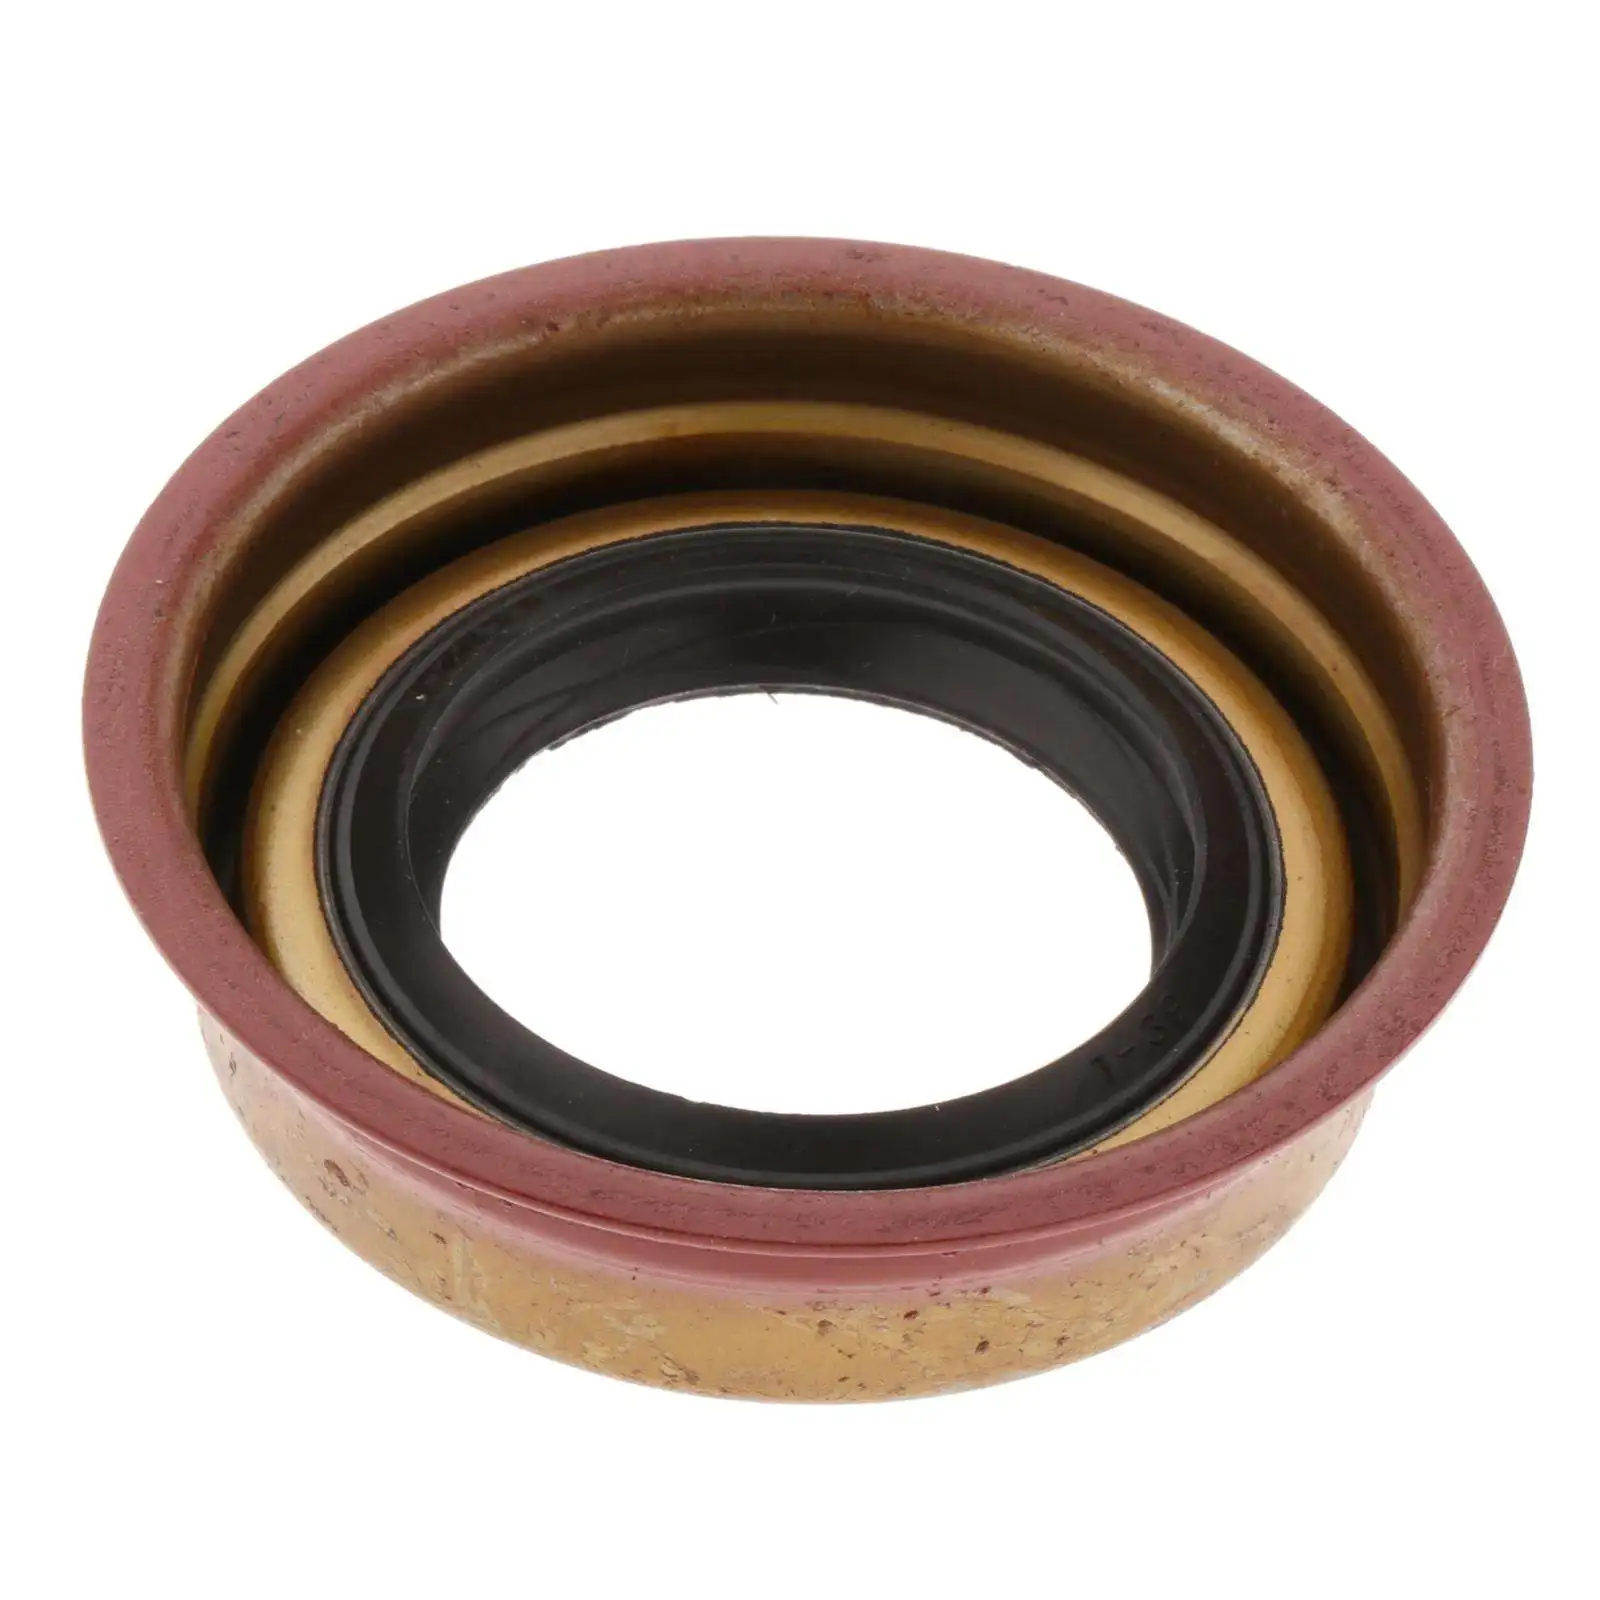 Oil Seal Easy to Install Premium Fit for 4T65E Transmission Direct Replaces Spare Parts